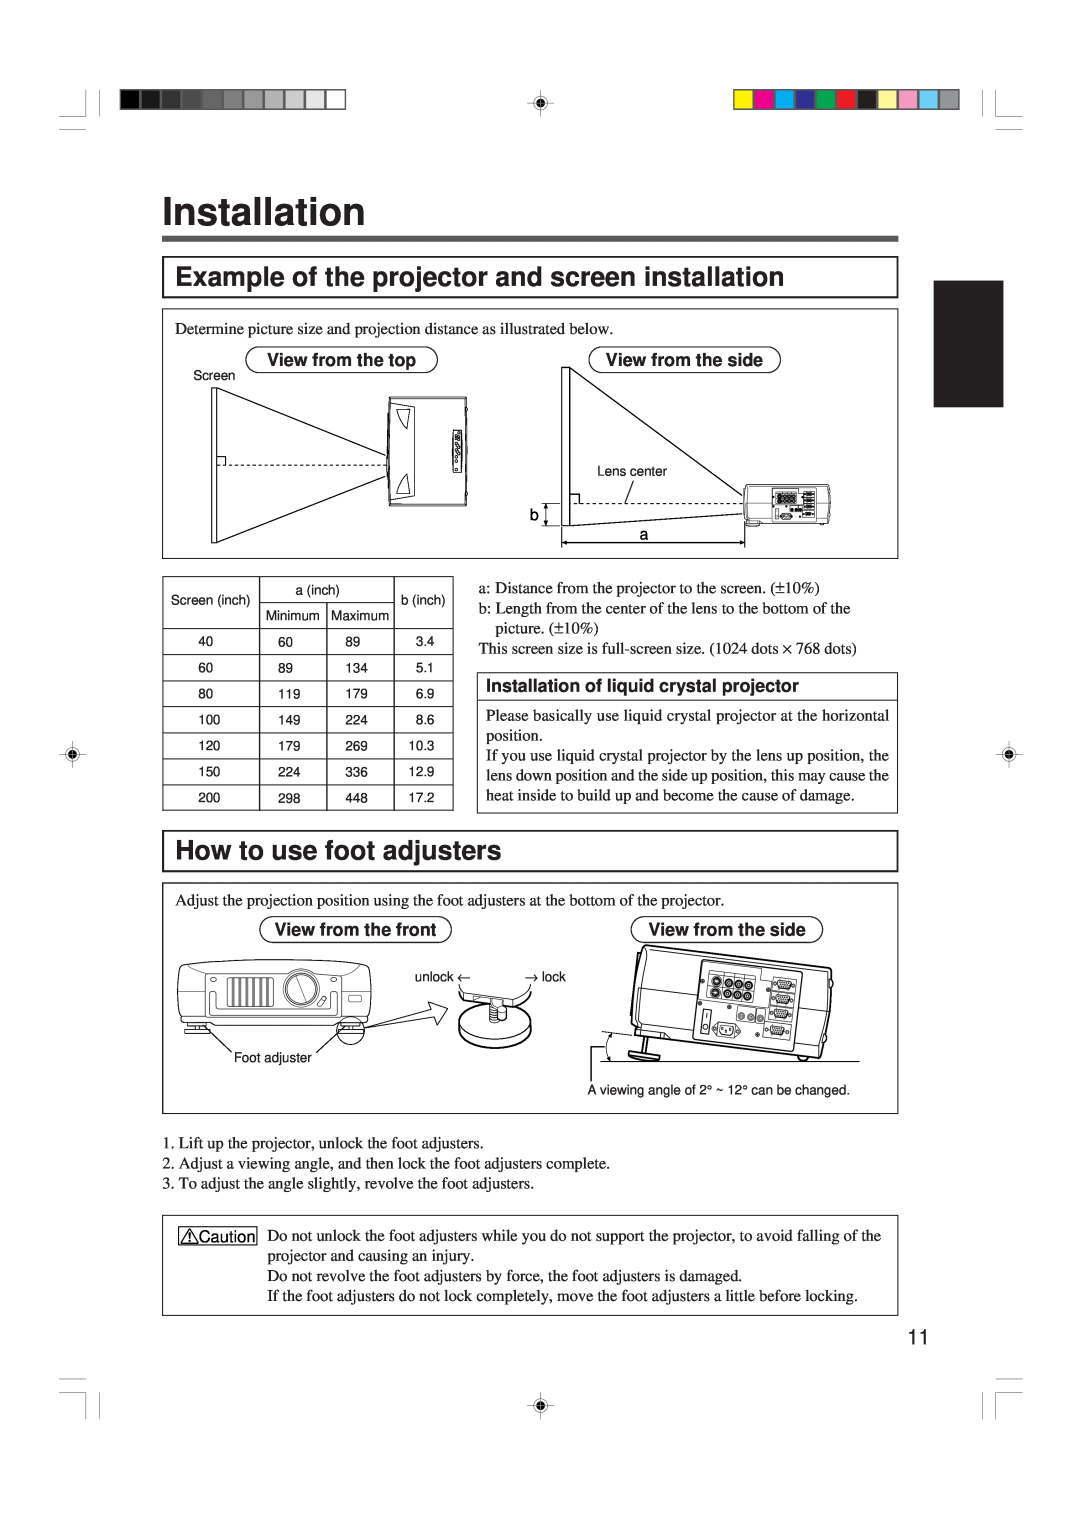 Hitachi CP-X955W/E specifications Installation, Example of the projector and screen installation, How to use foot adjusters 